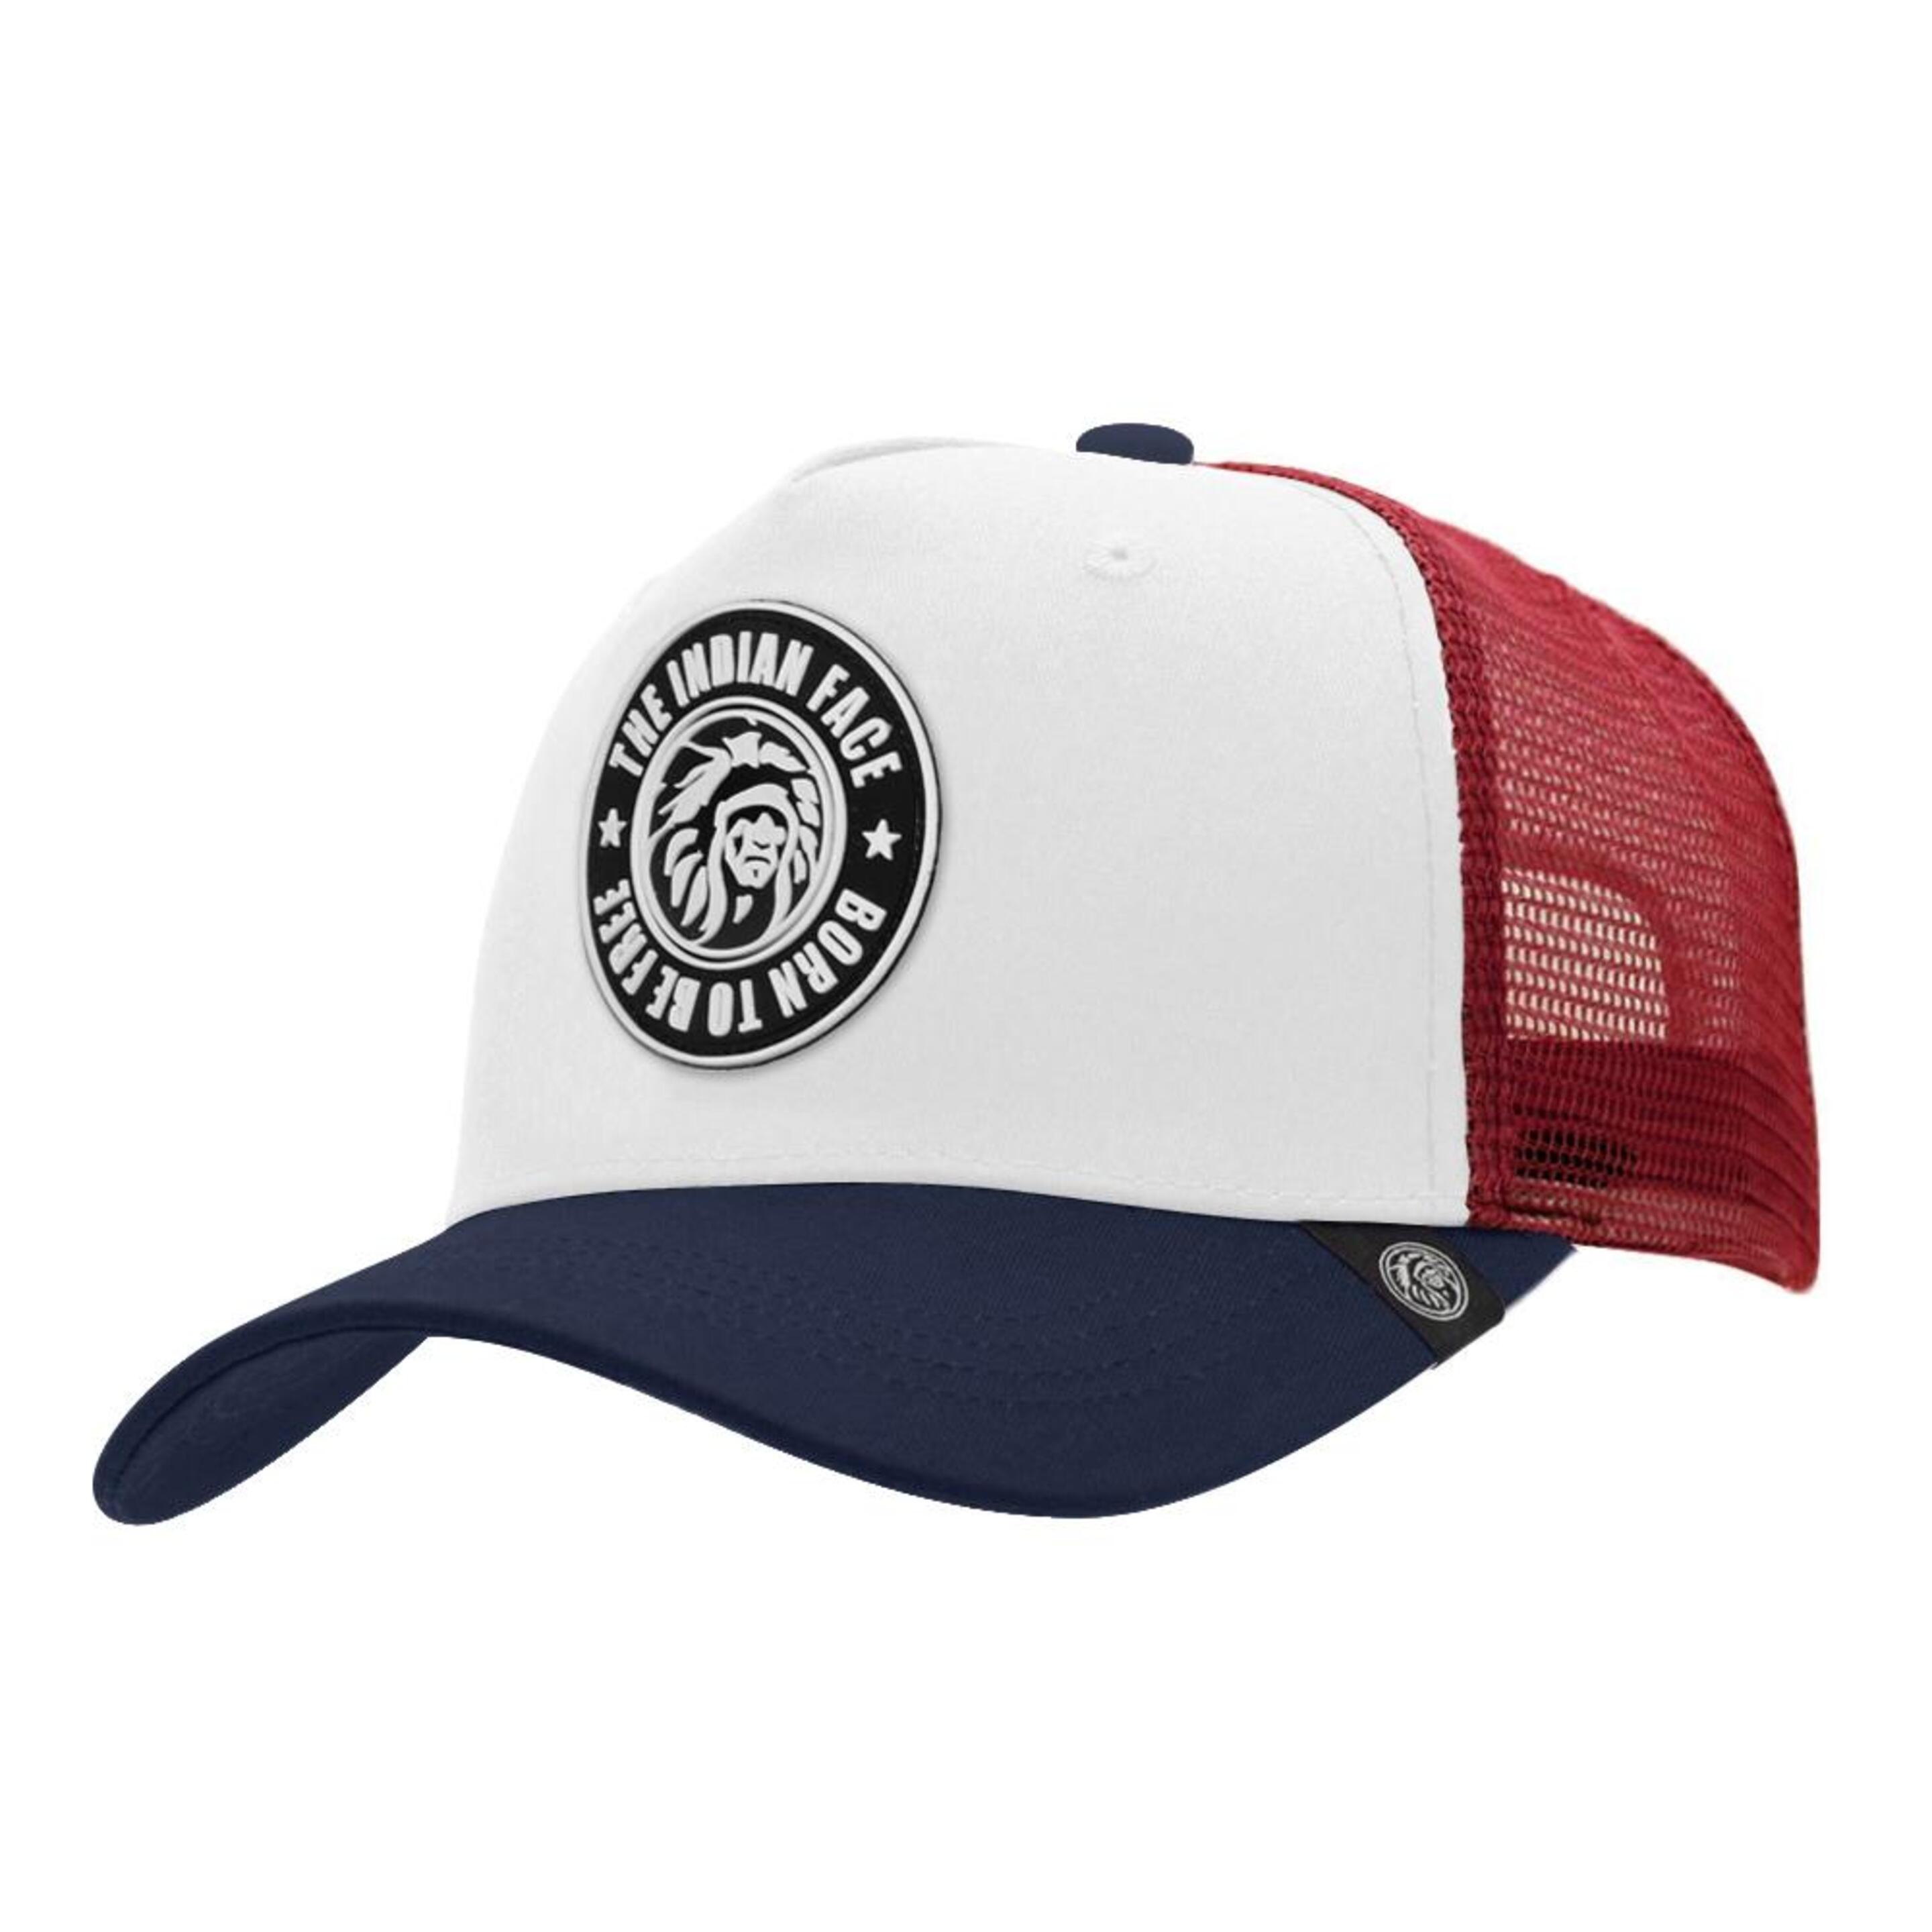 Gorra Trucker Born To Be Free Blanca The Indian Face Para Hombre Y Mujer